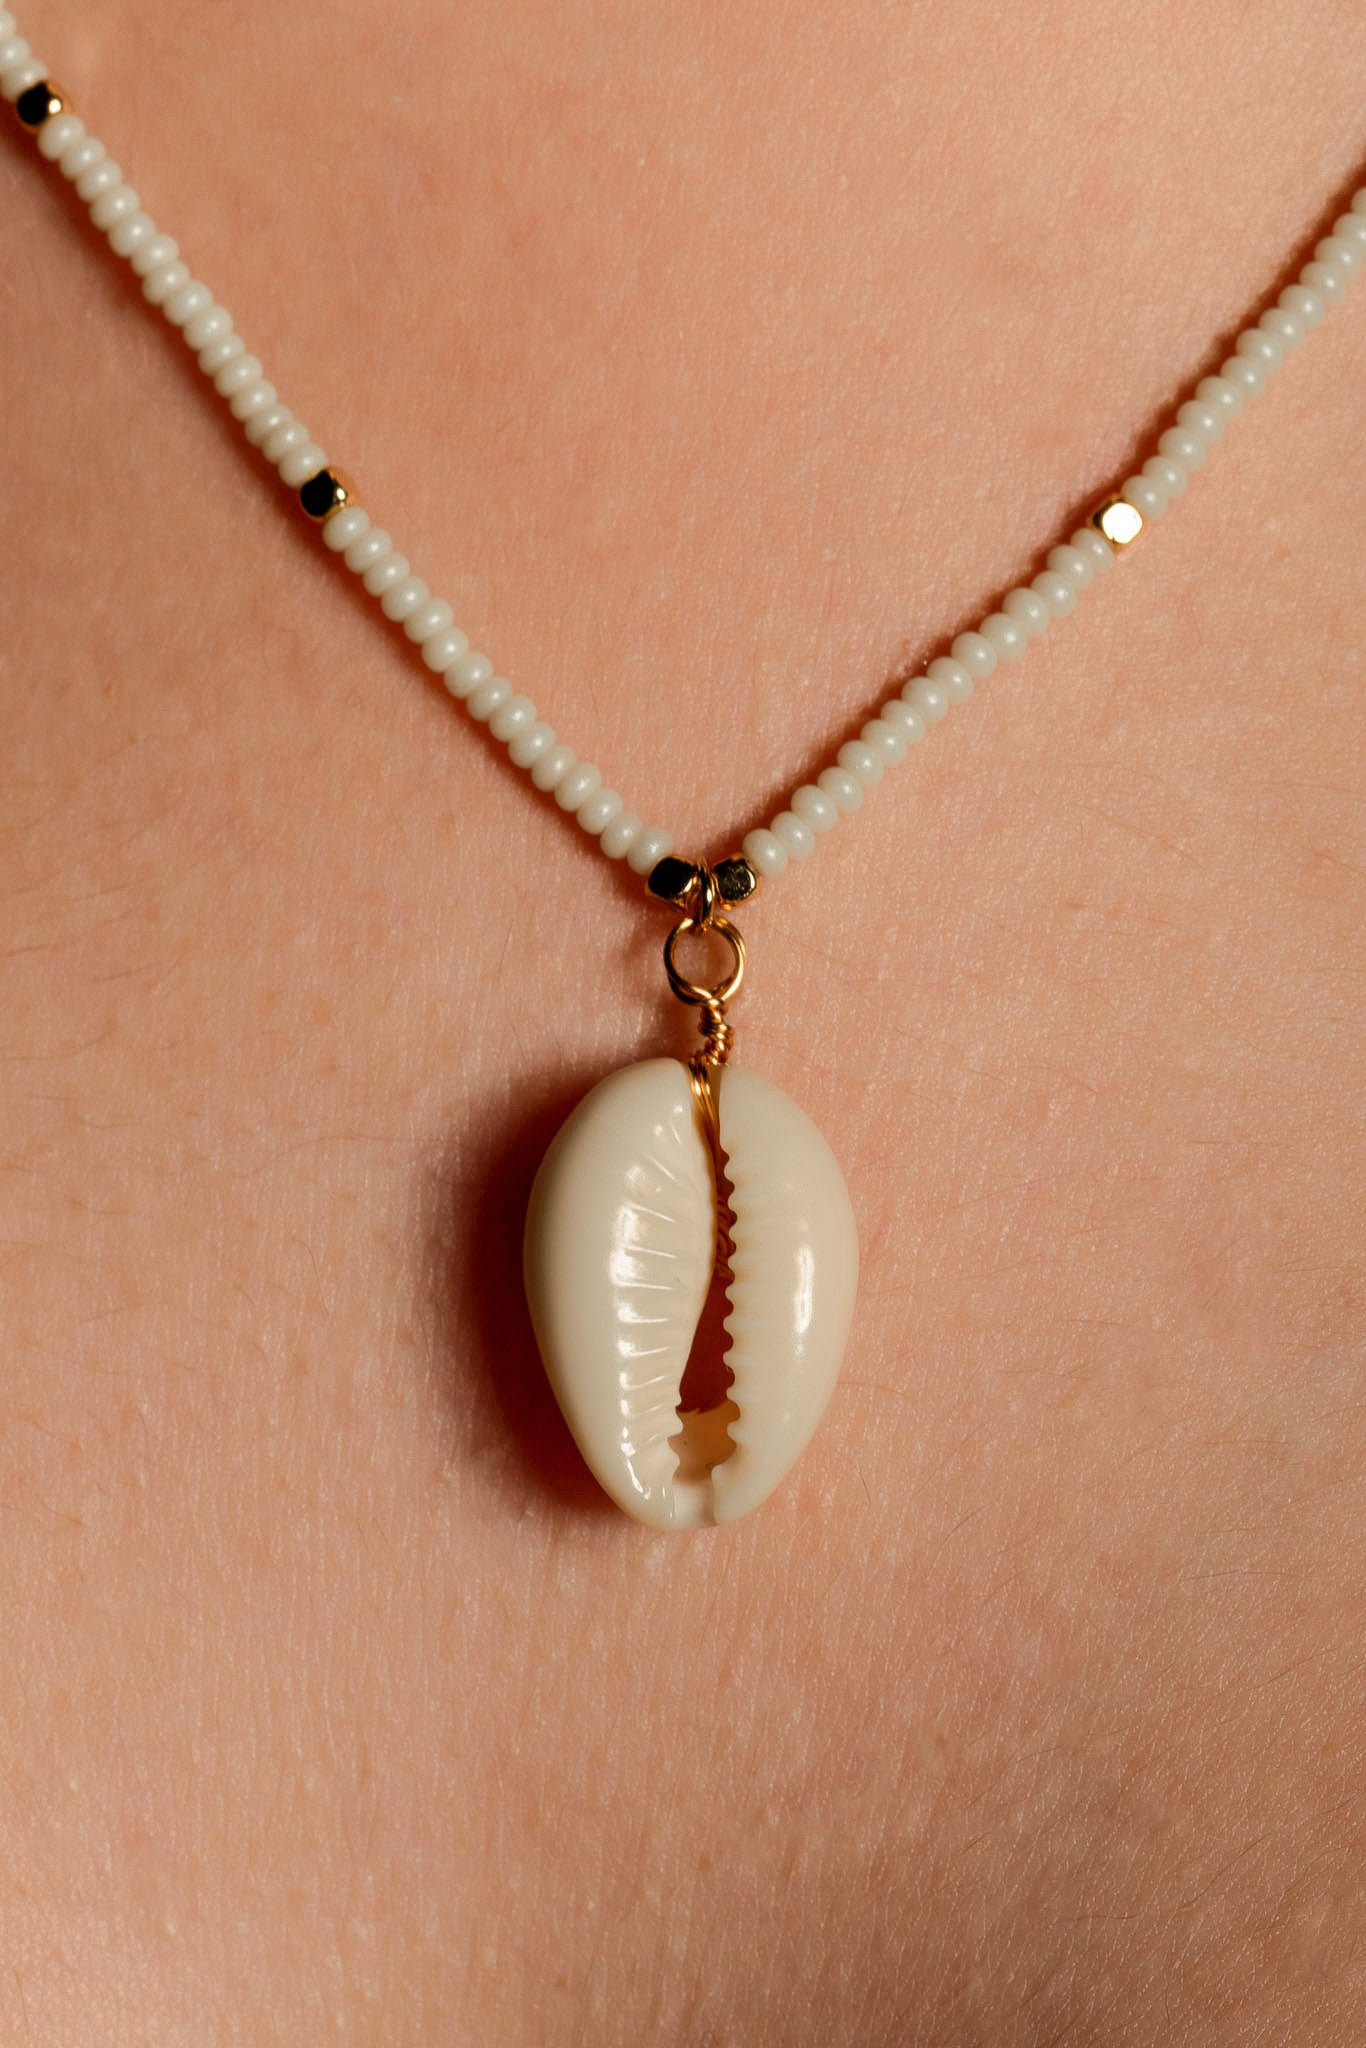 Beaded Necklace with Shell Pendant